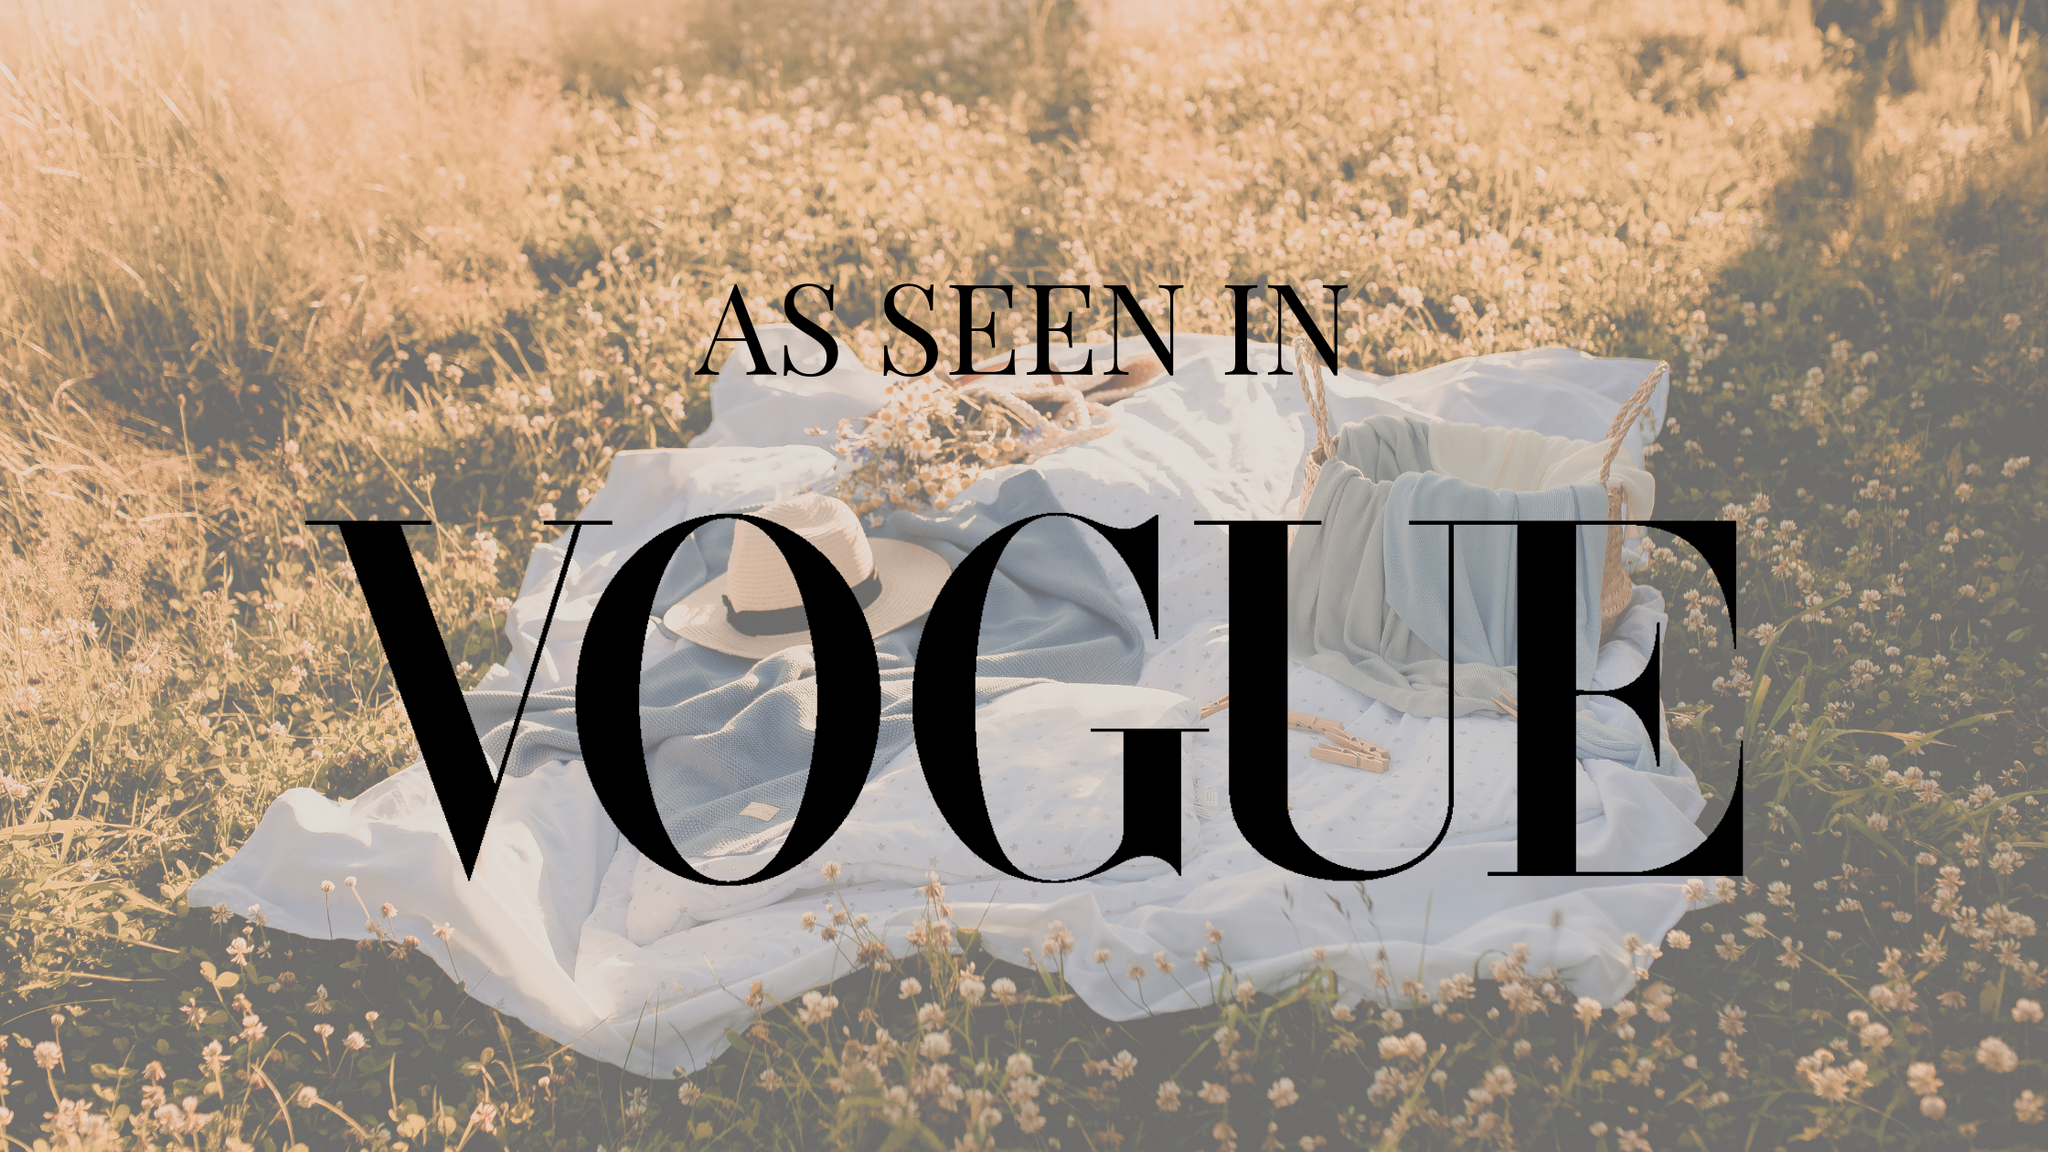 AS SEEN IN VOGUE